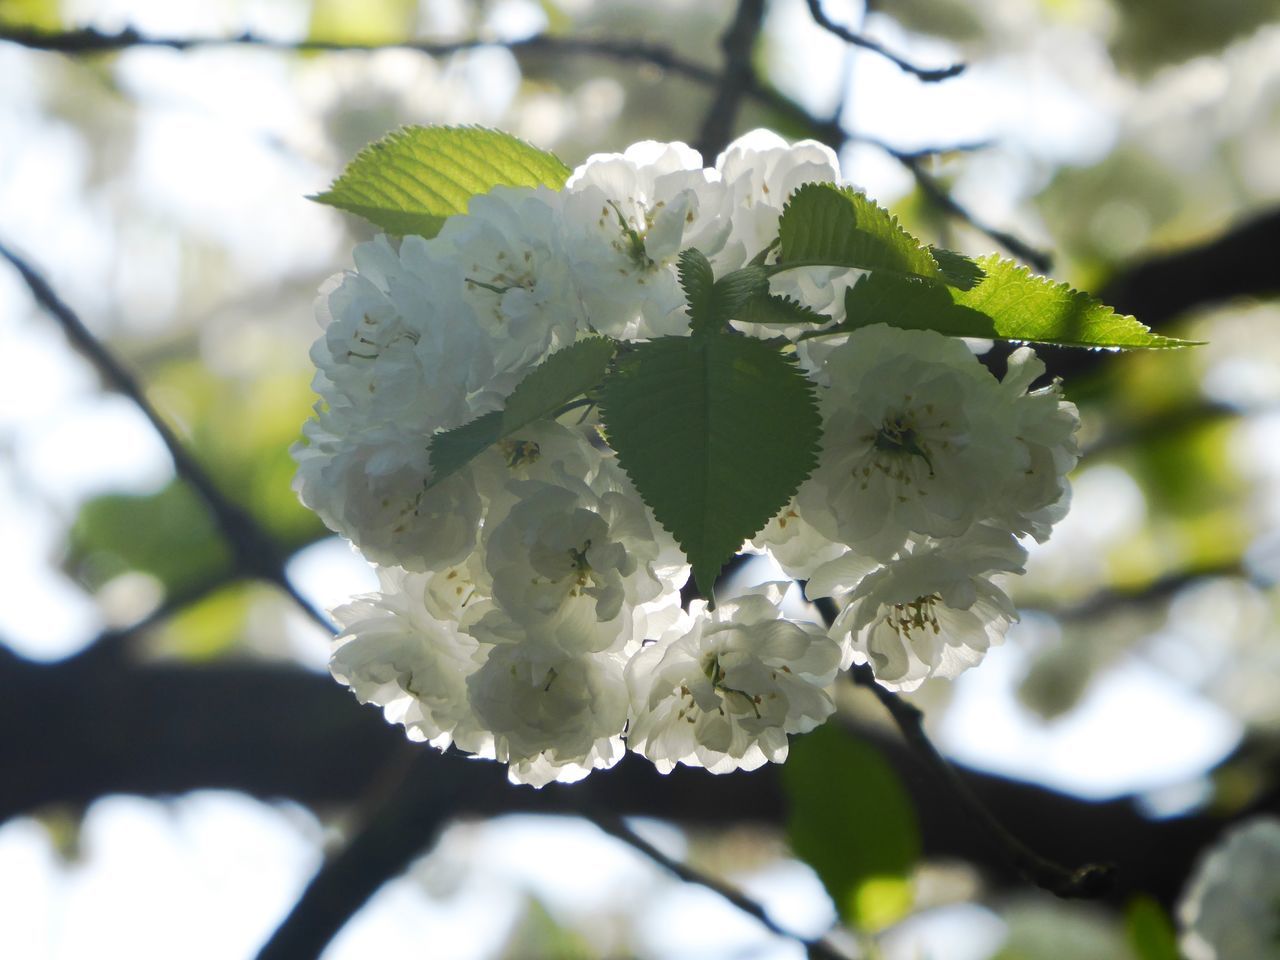 CLOSE-UP OF WHITE CHERRY BLOSSOMS ON TREE